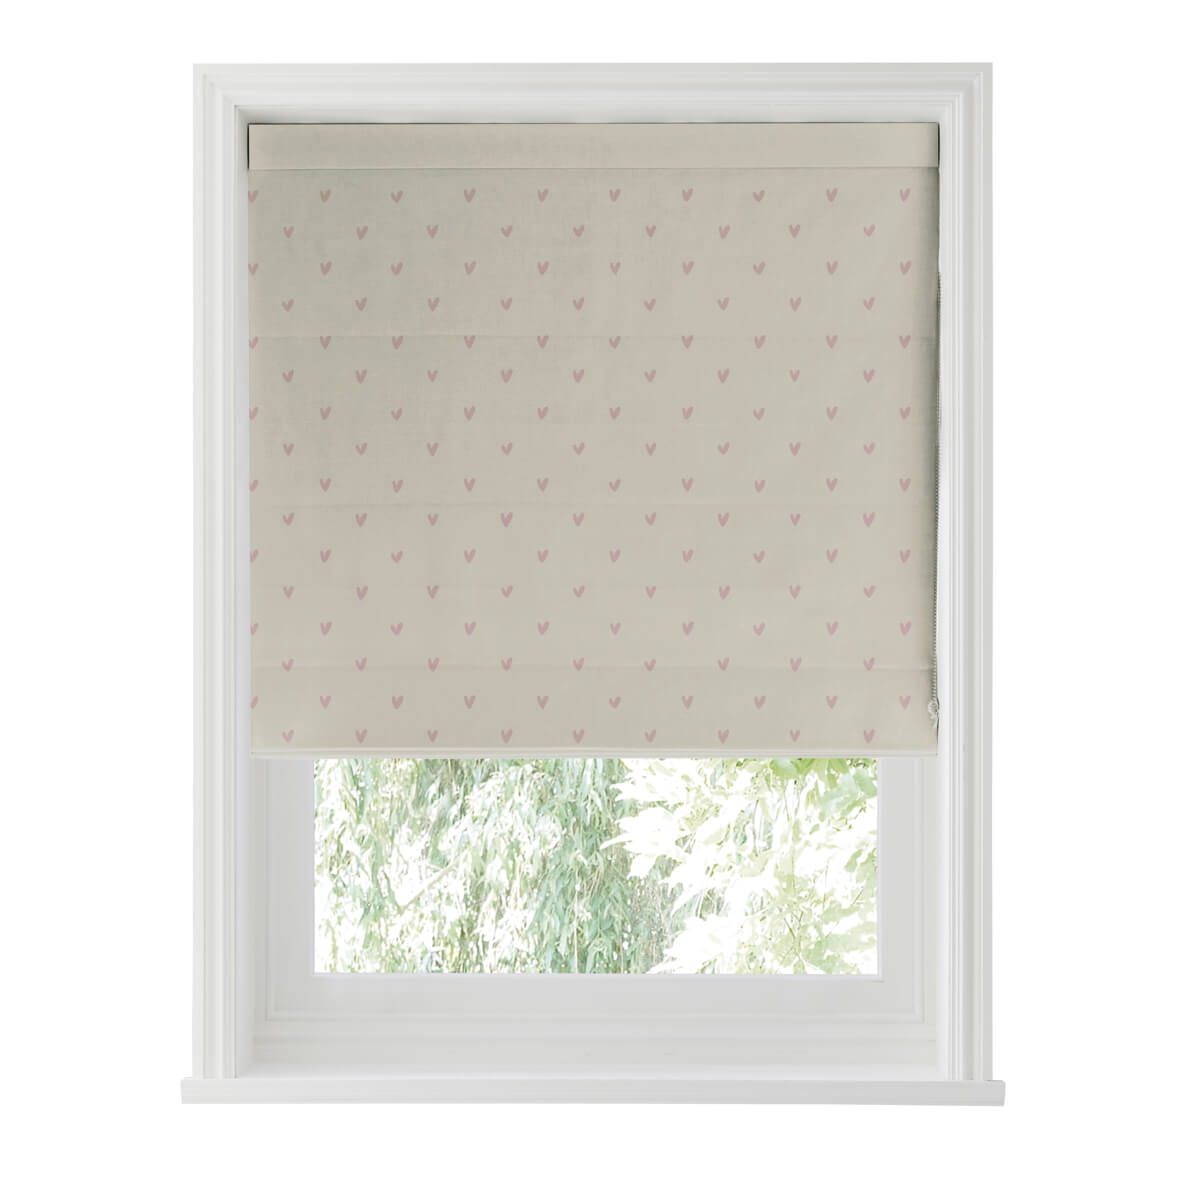 Hearts Blush Made to Measure Roman Blind